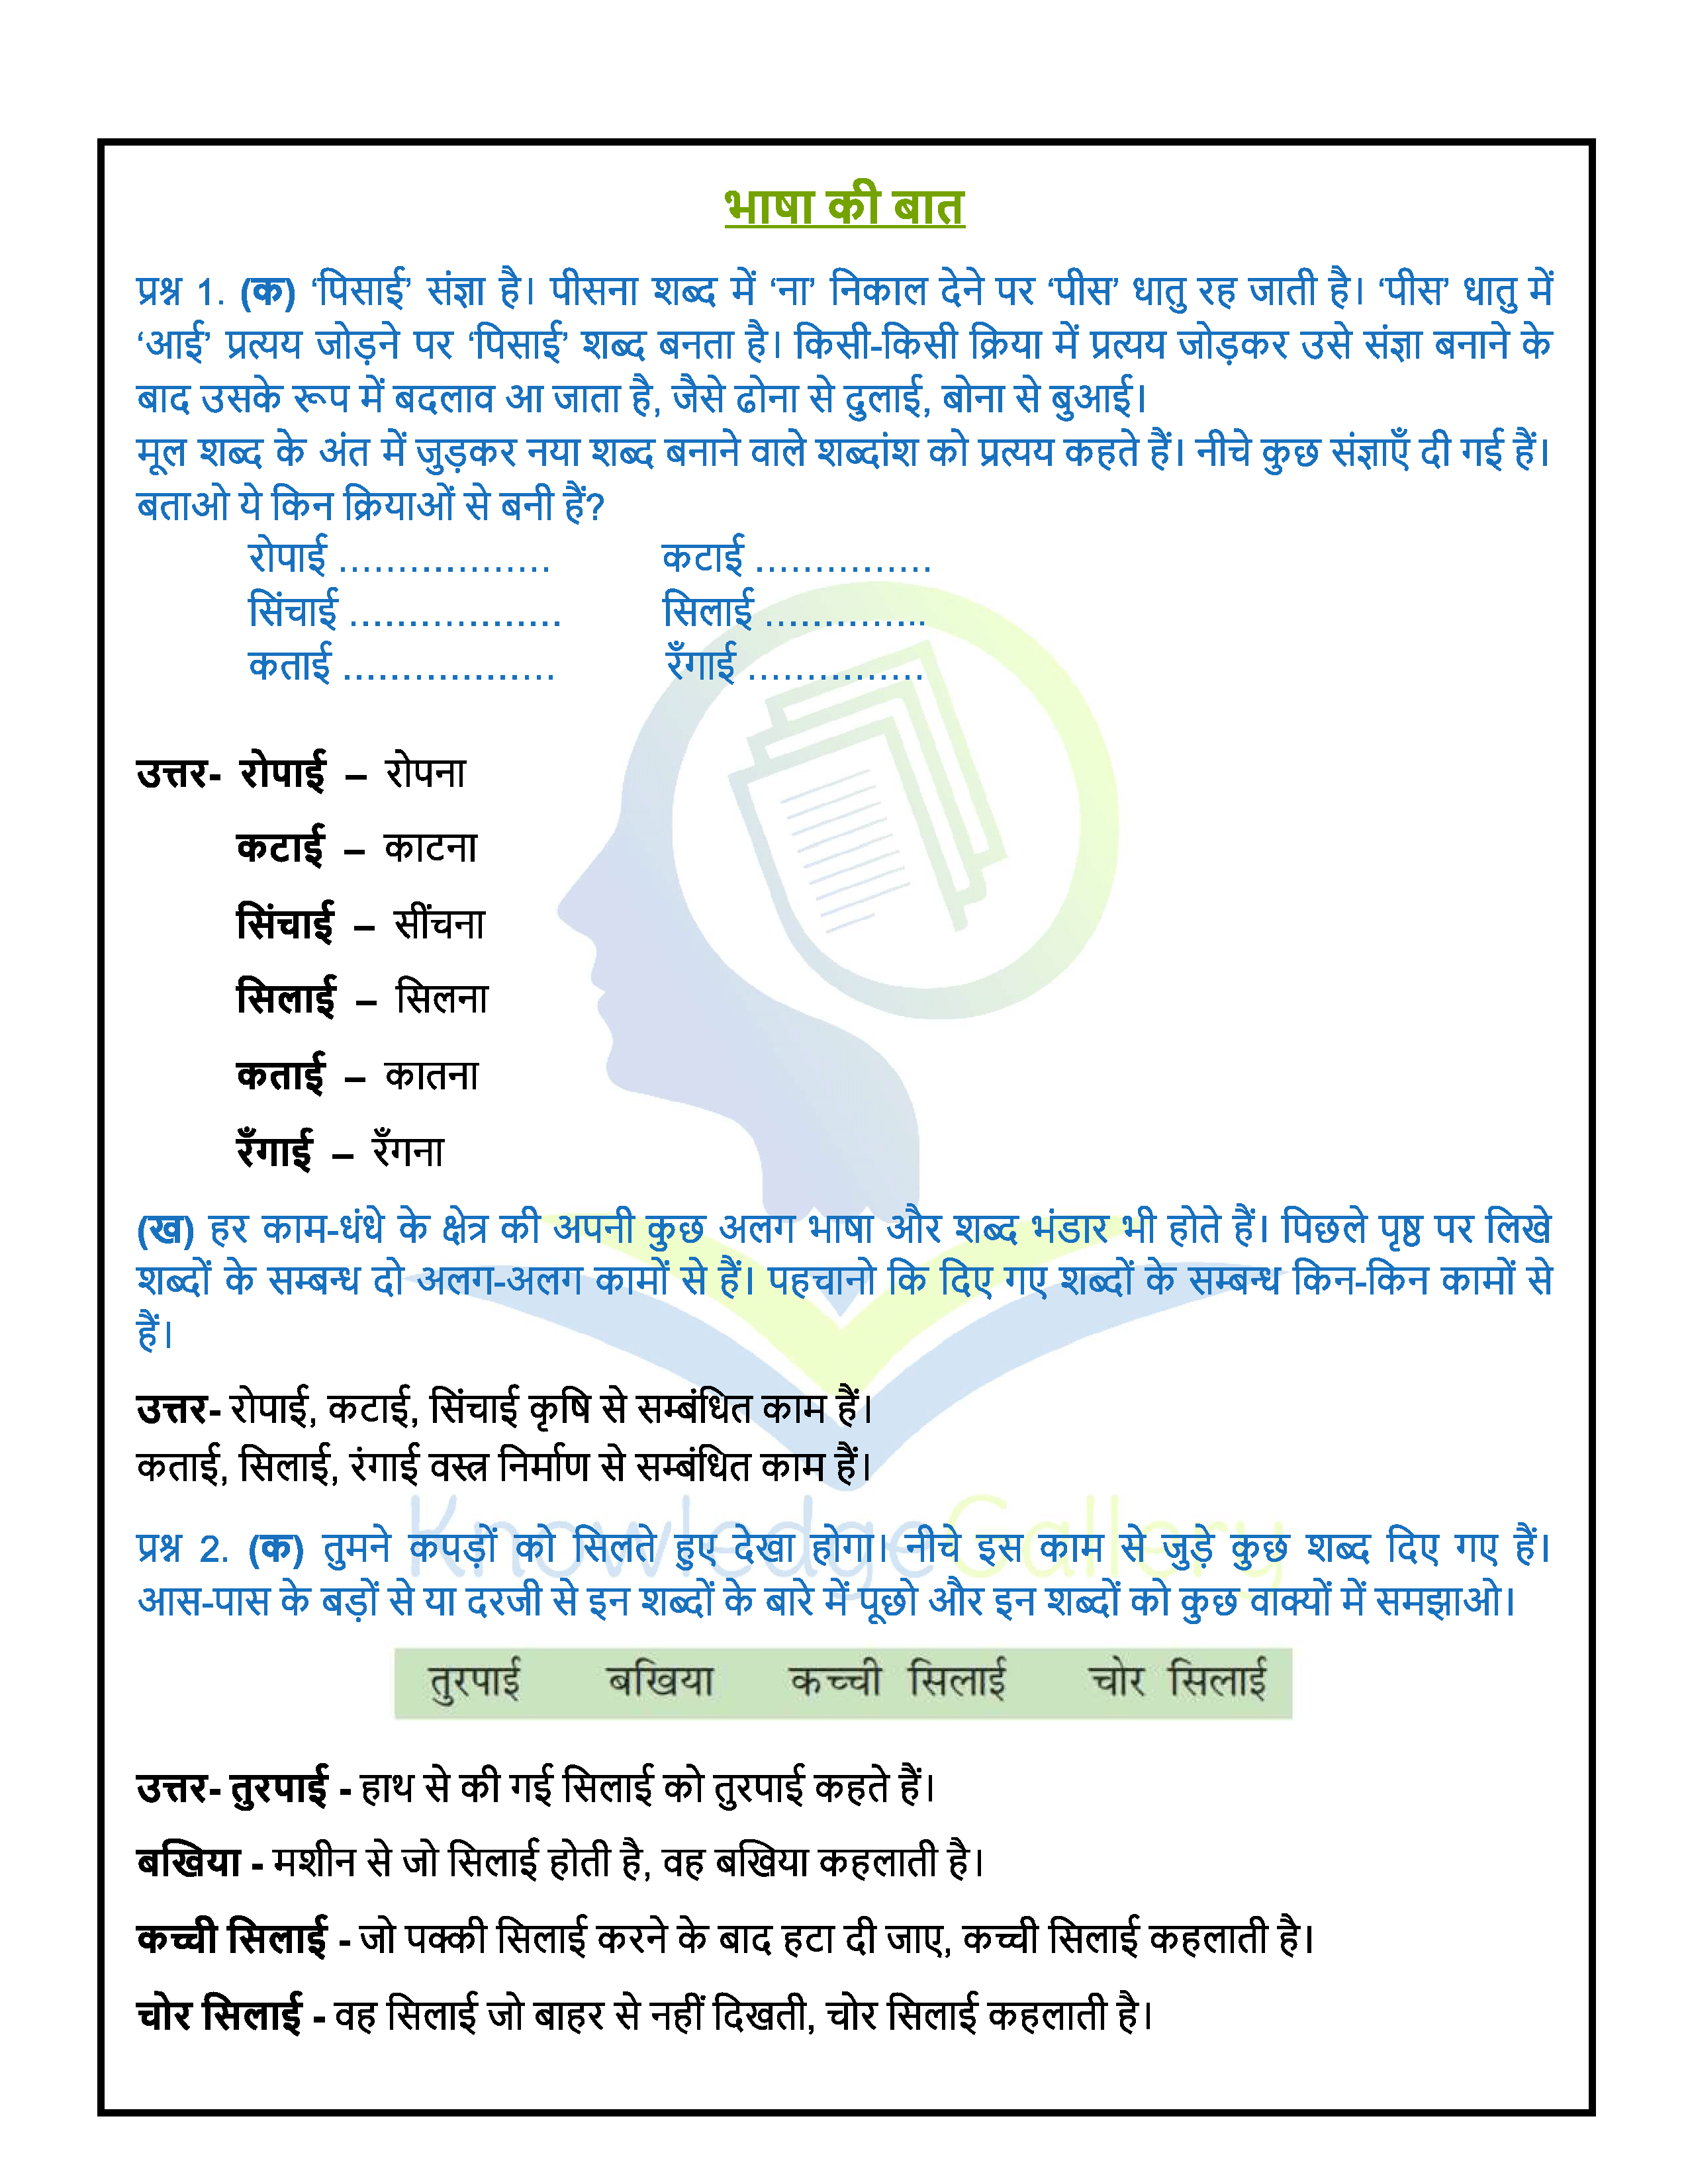 NCERT Solution For Class 6 Hindi Chapter 15 part 5